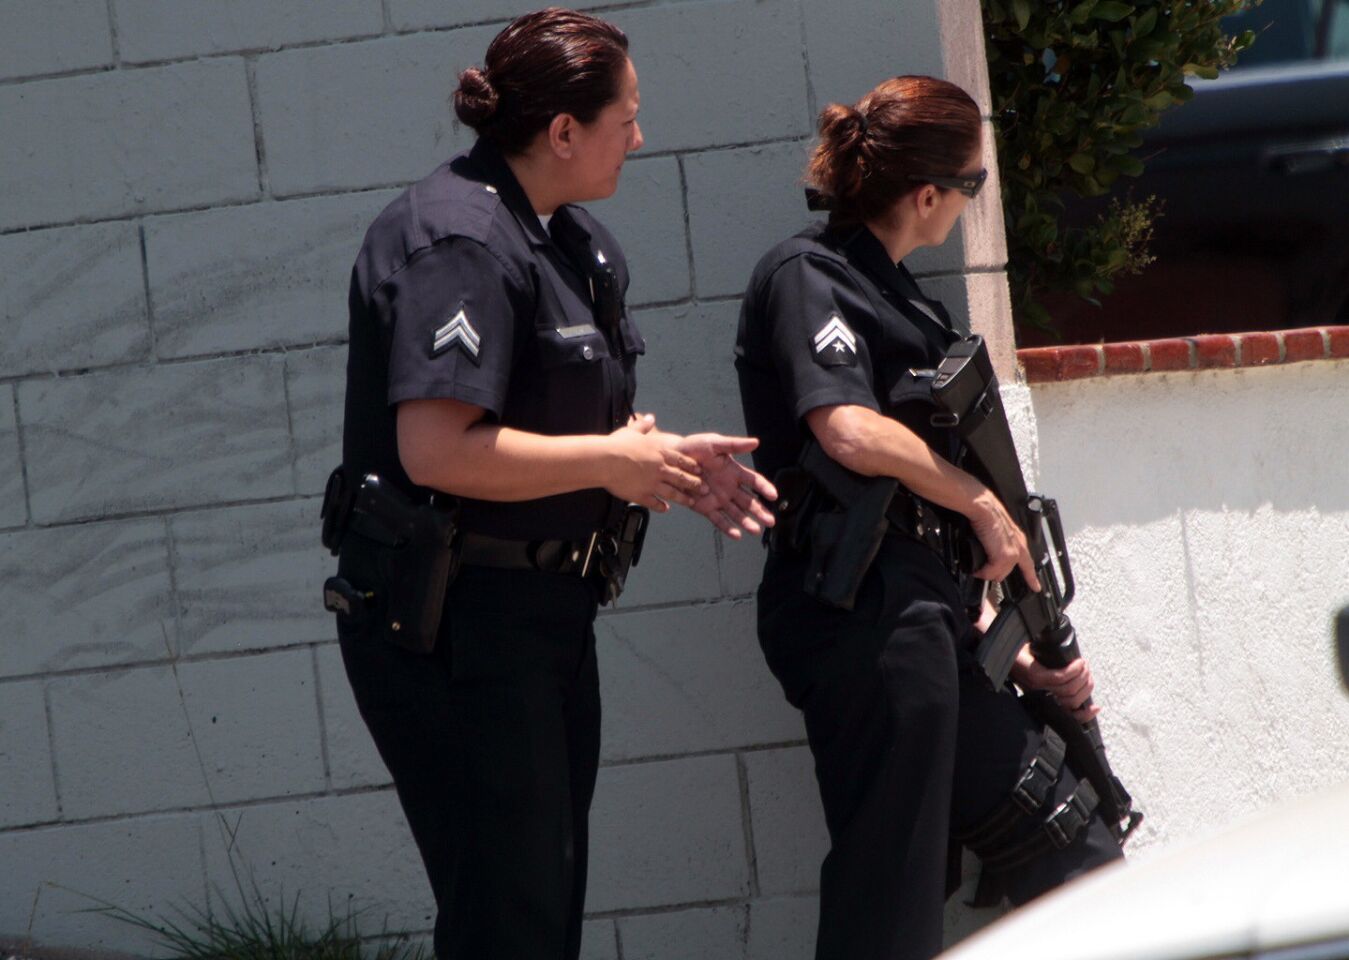 Armed LAPD officers take up position on Hartsook Street in North Hollywood after a man who led police on a high-speed chase on several freeways Monday was roaming around a neighborhood armed with an assault rifle Monday.